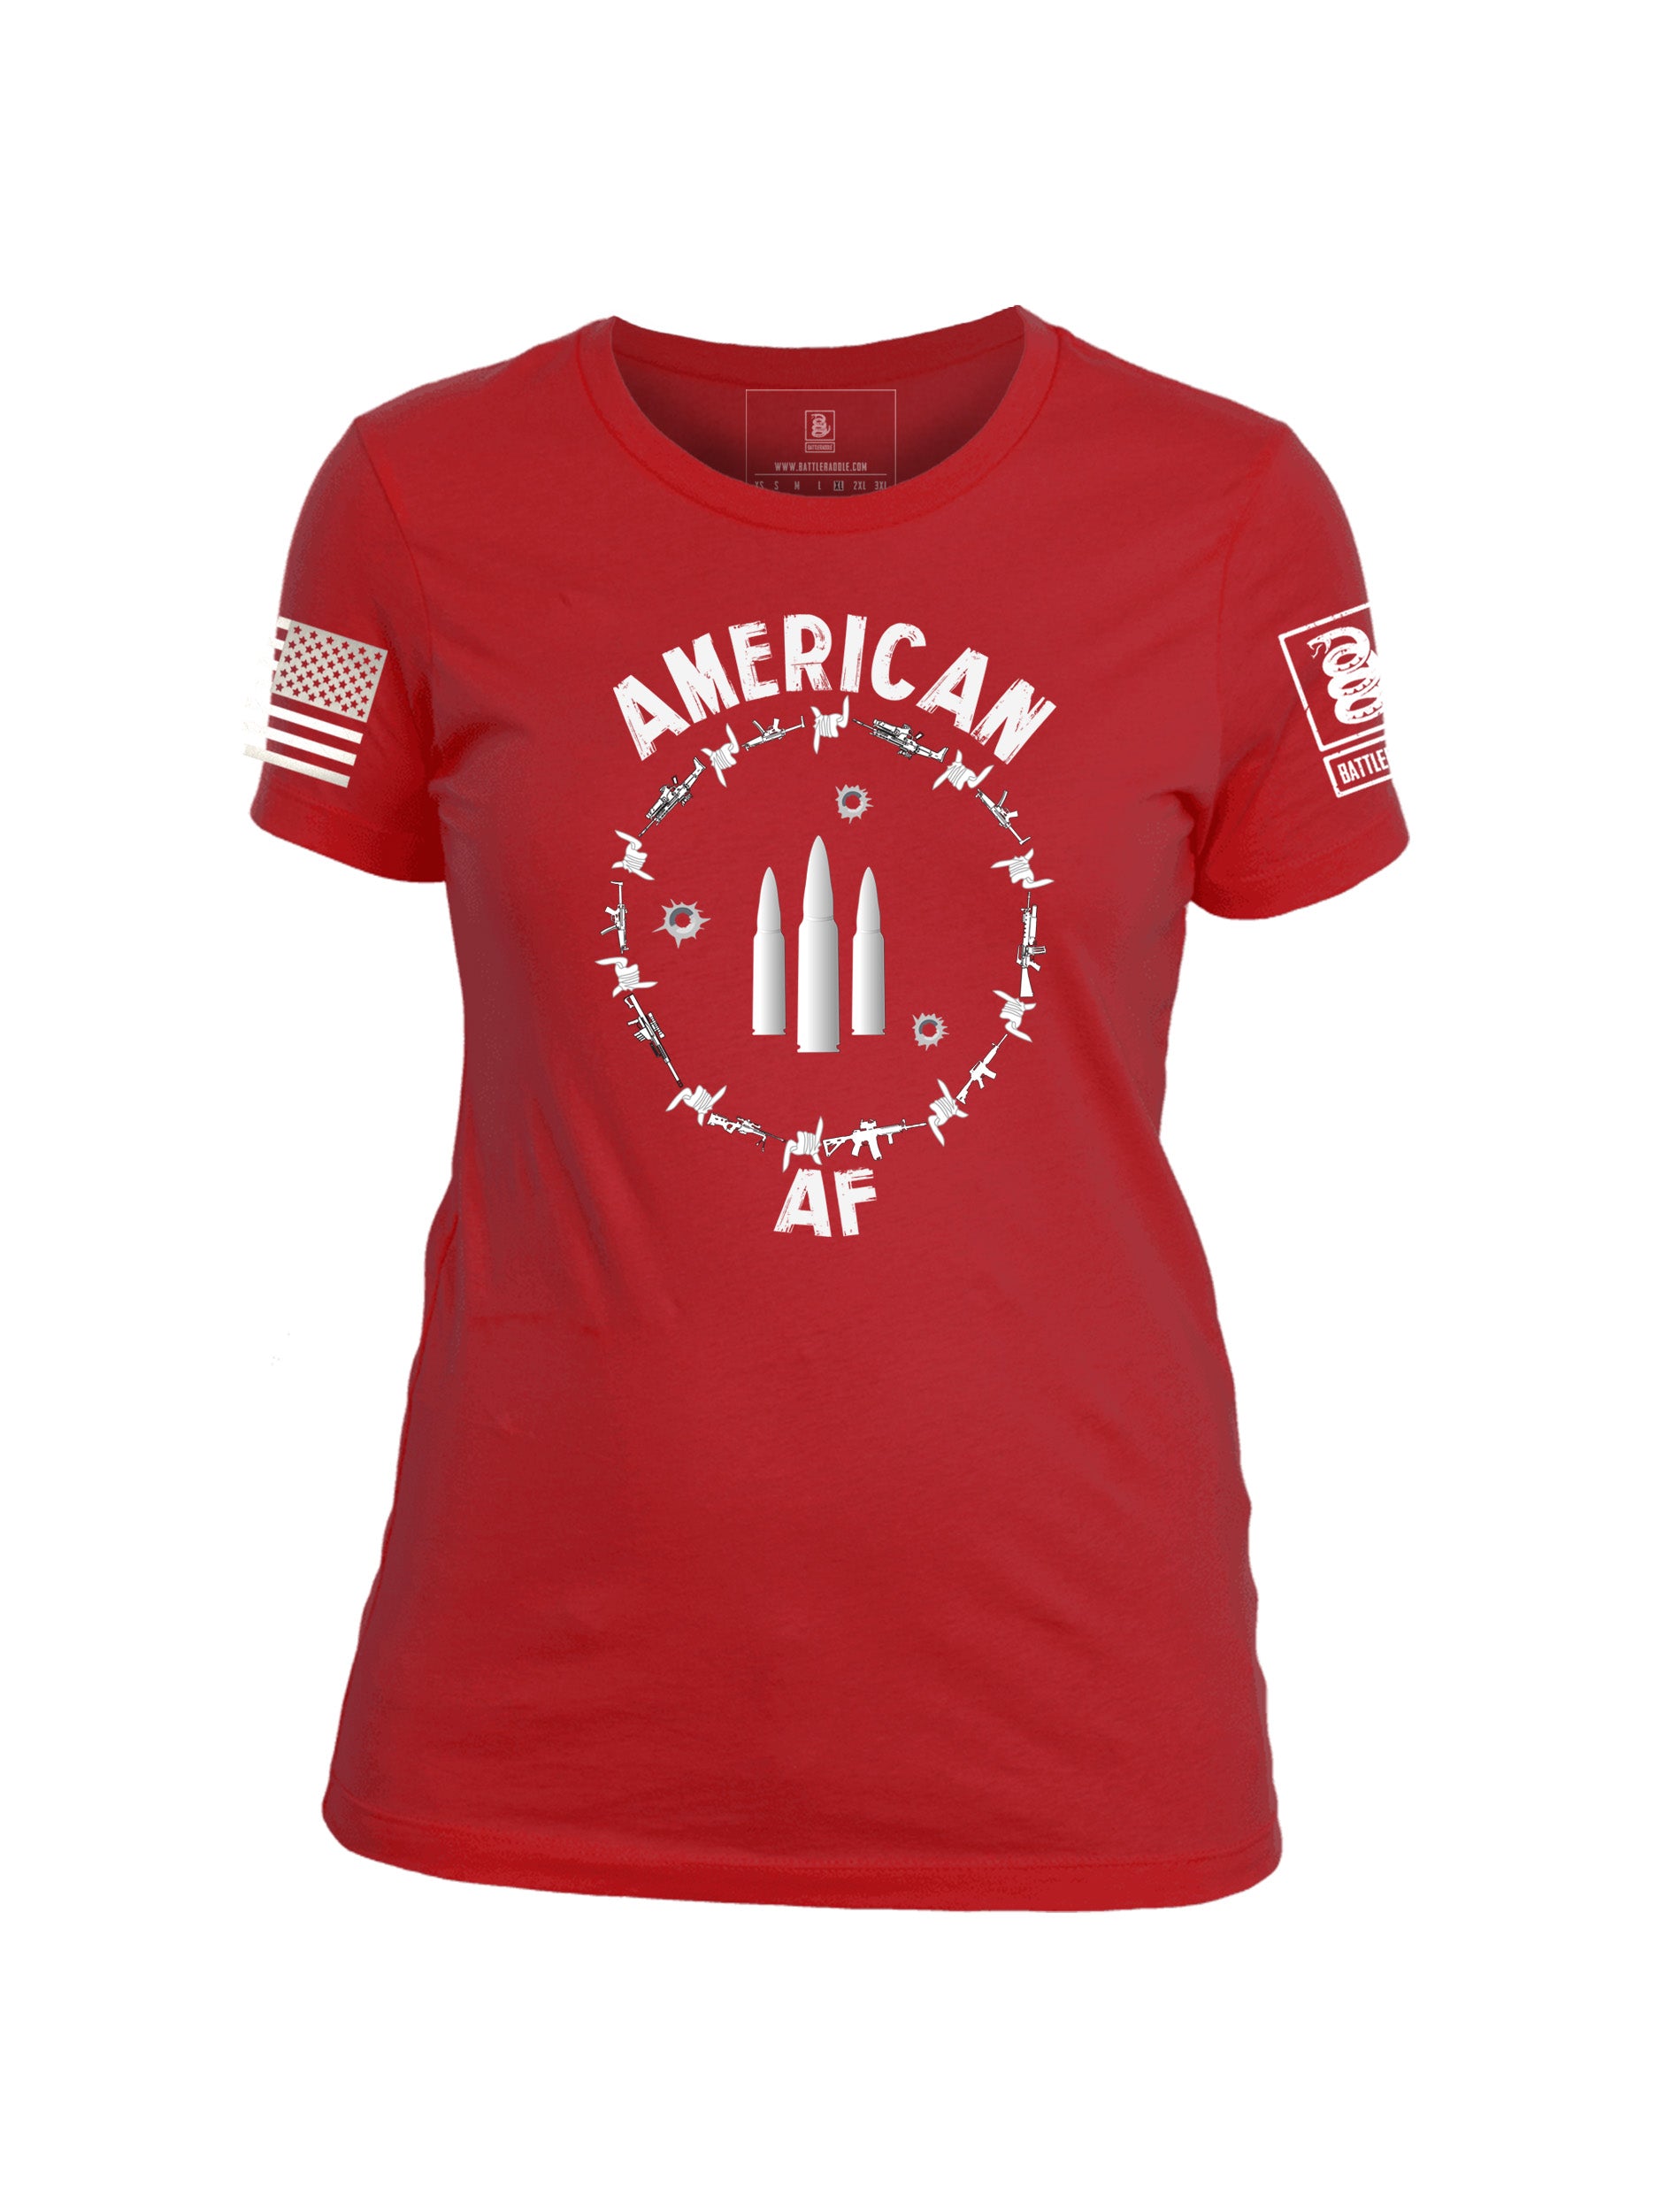 Battleraddle American AF Womens Patriotic Cool Funny Cotton Crew Neck T Shirt